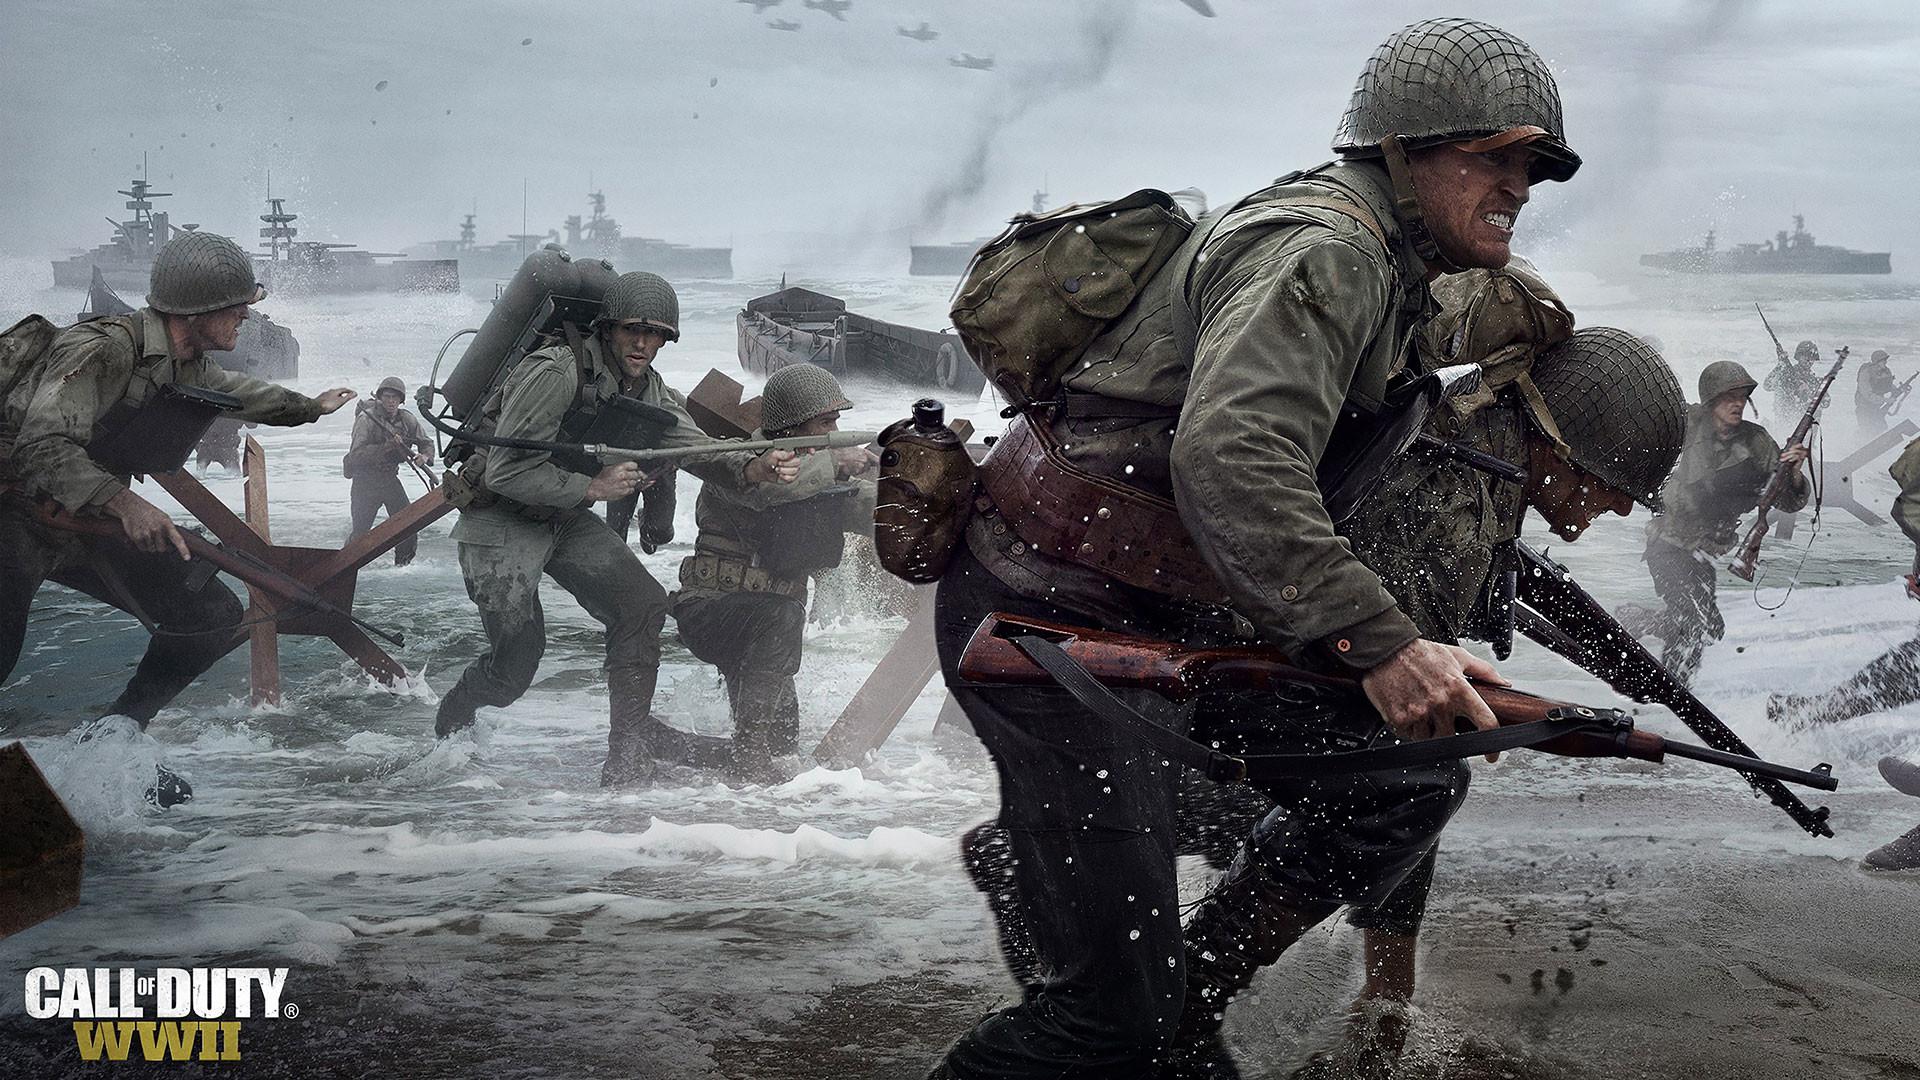 1920x1080 ... CALL OF DUTY WWII 1080p Wallpaper ...